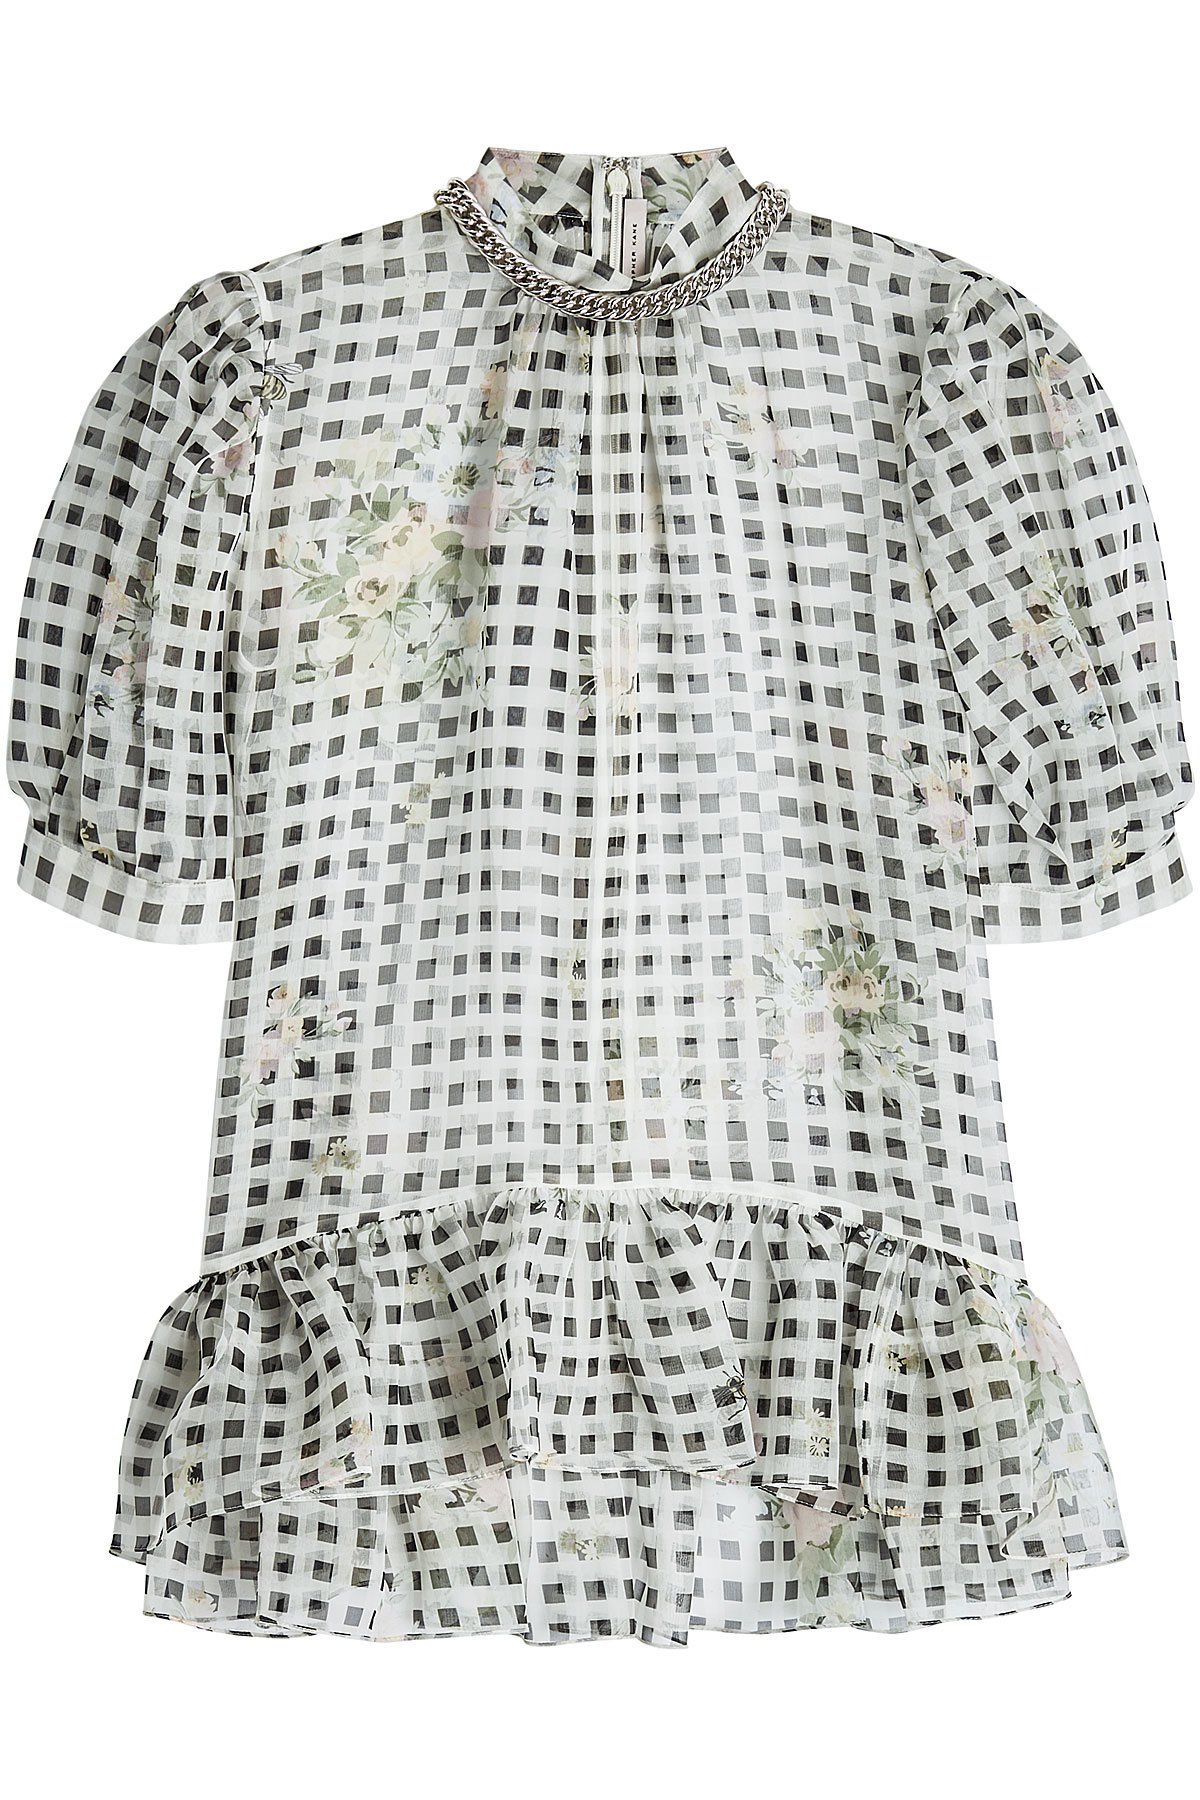 Christopher Kane - Printed Silk Blouse with Chain Embellishment